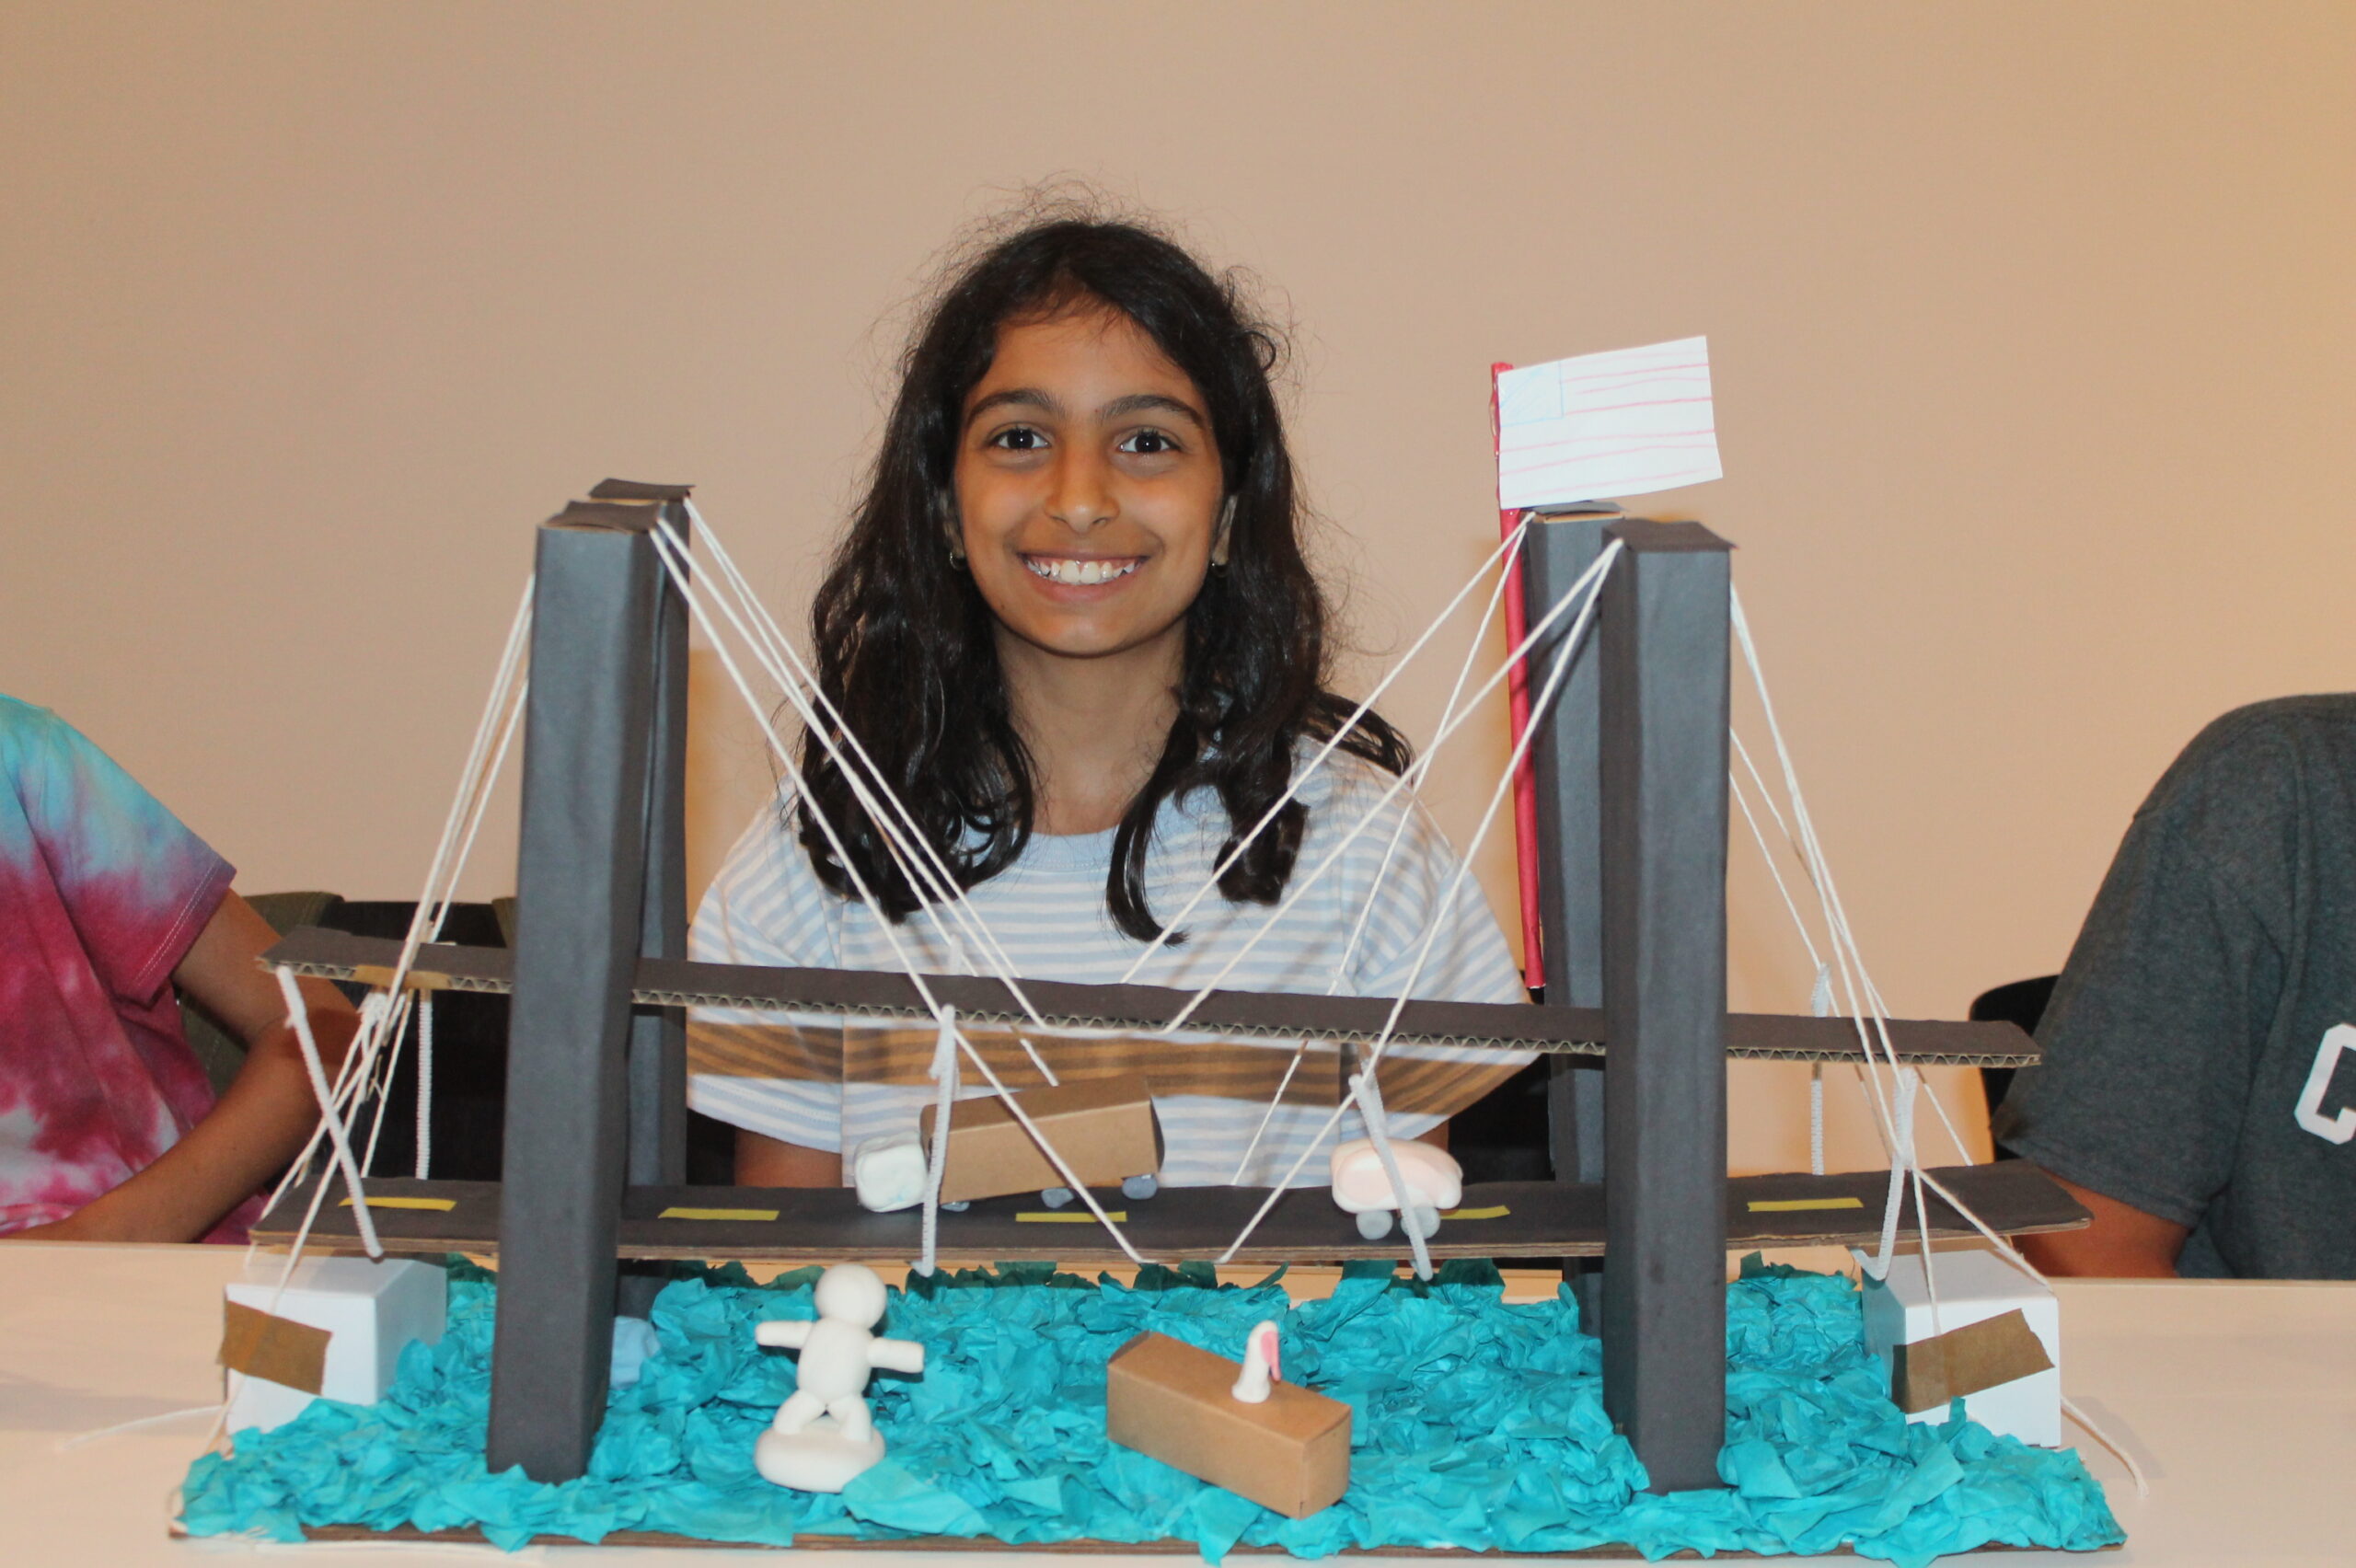 Elementary school student smiling behind her model of a suspension bridge